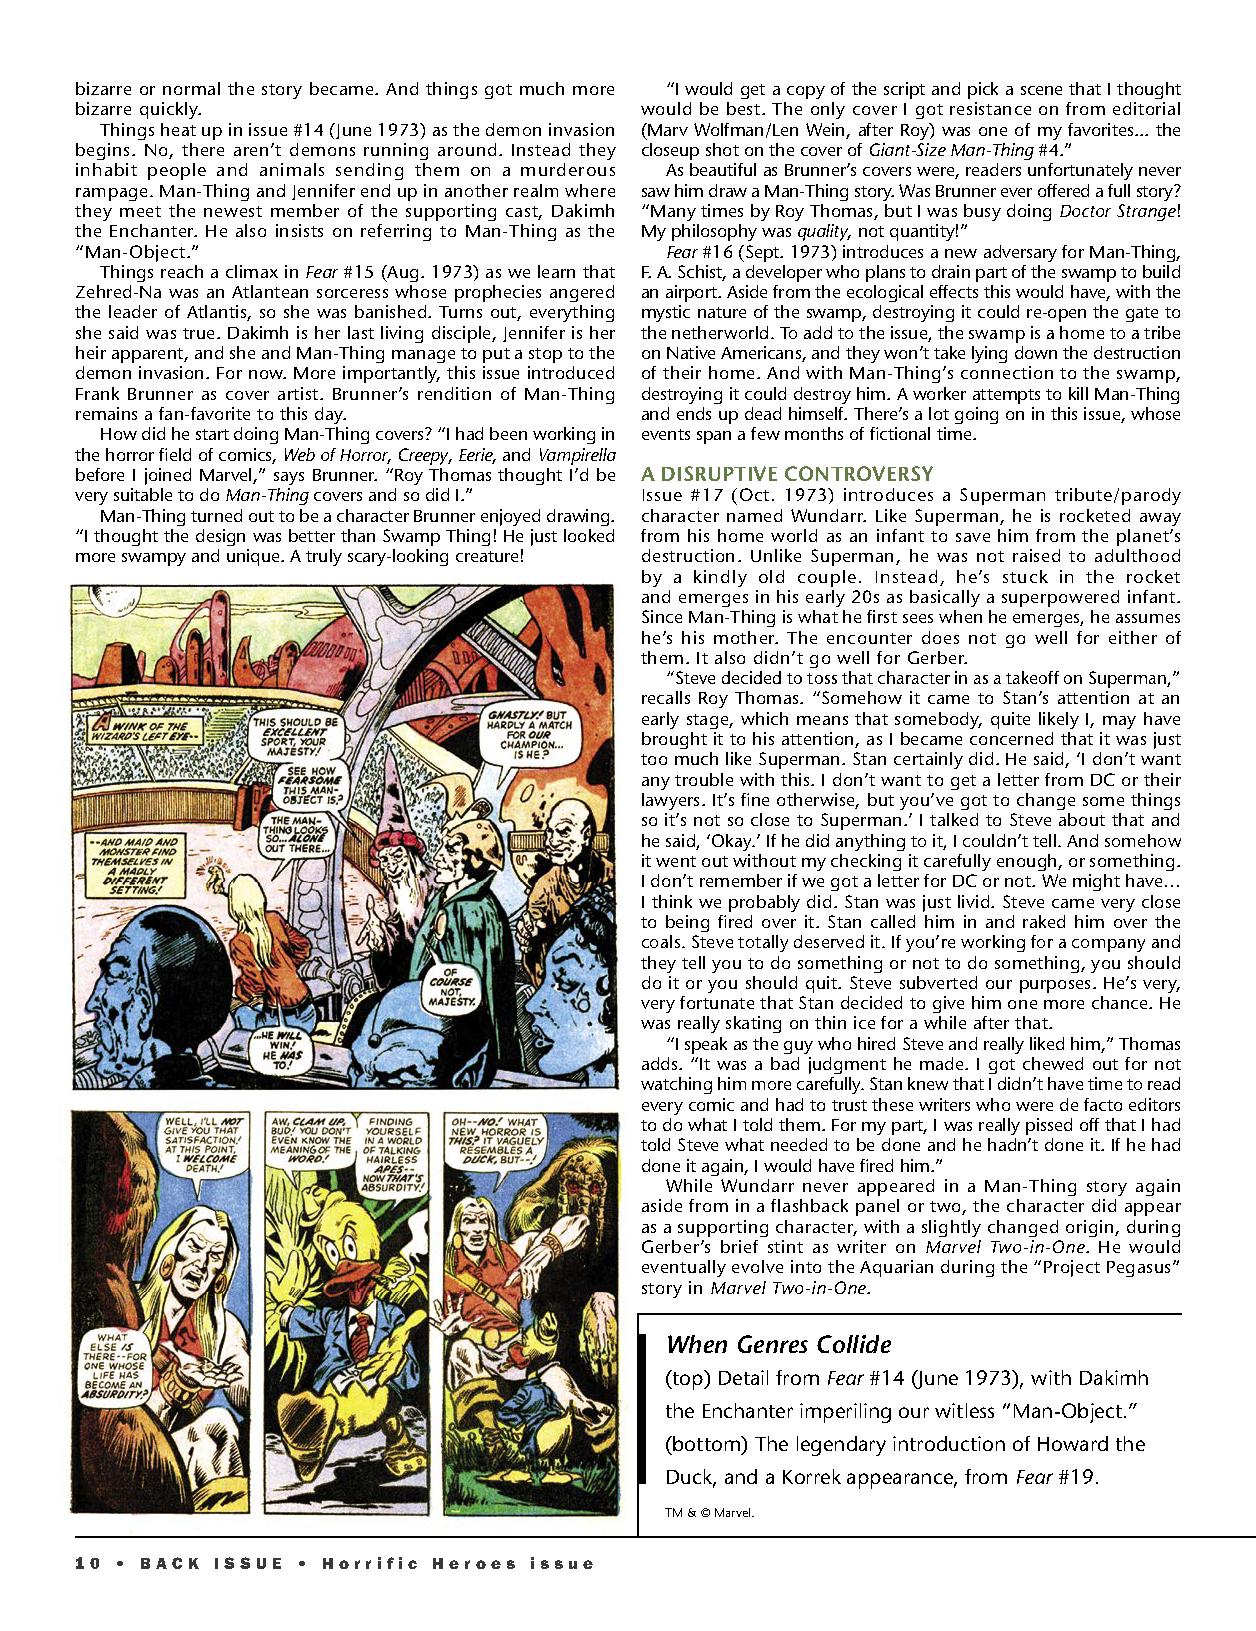 Read online Back Issue comic -  Issue #124 - 12